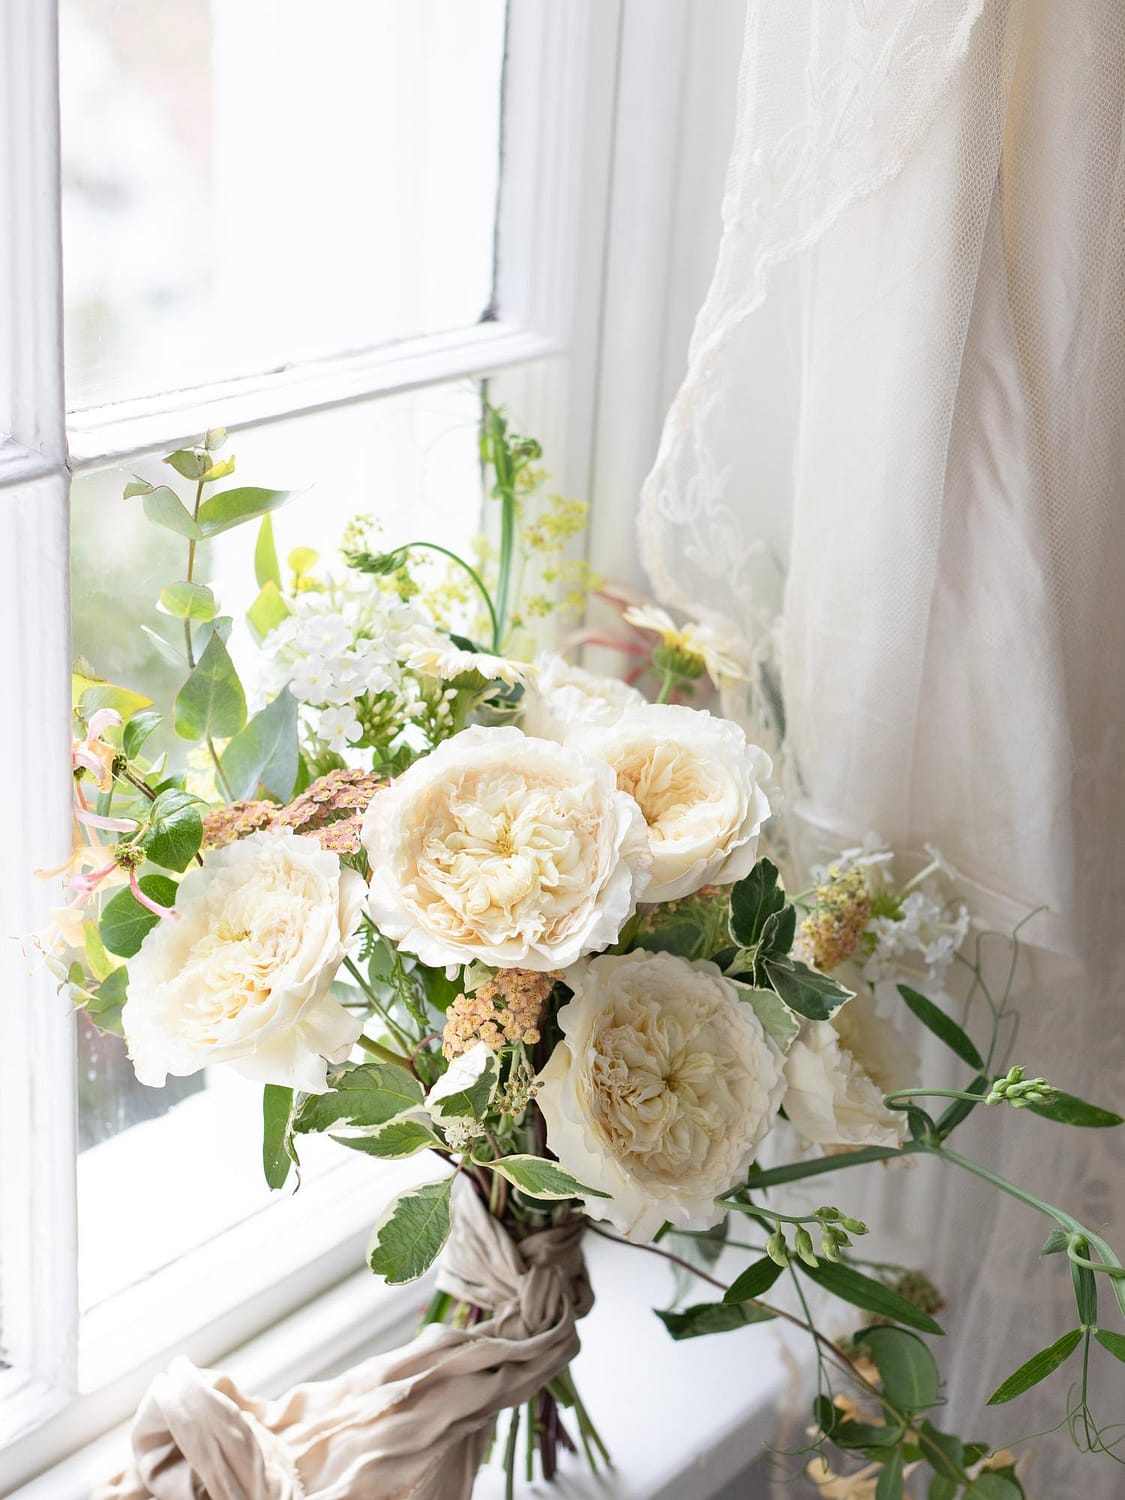 Roses de mariage blanches